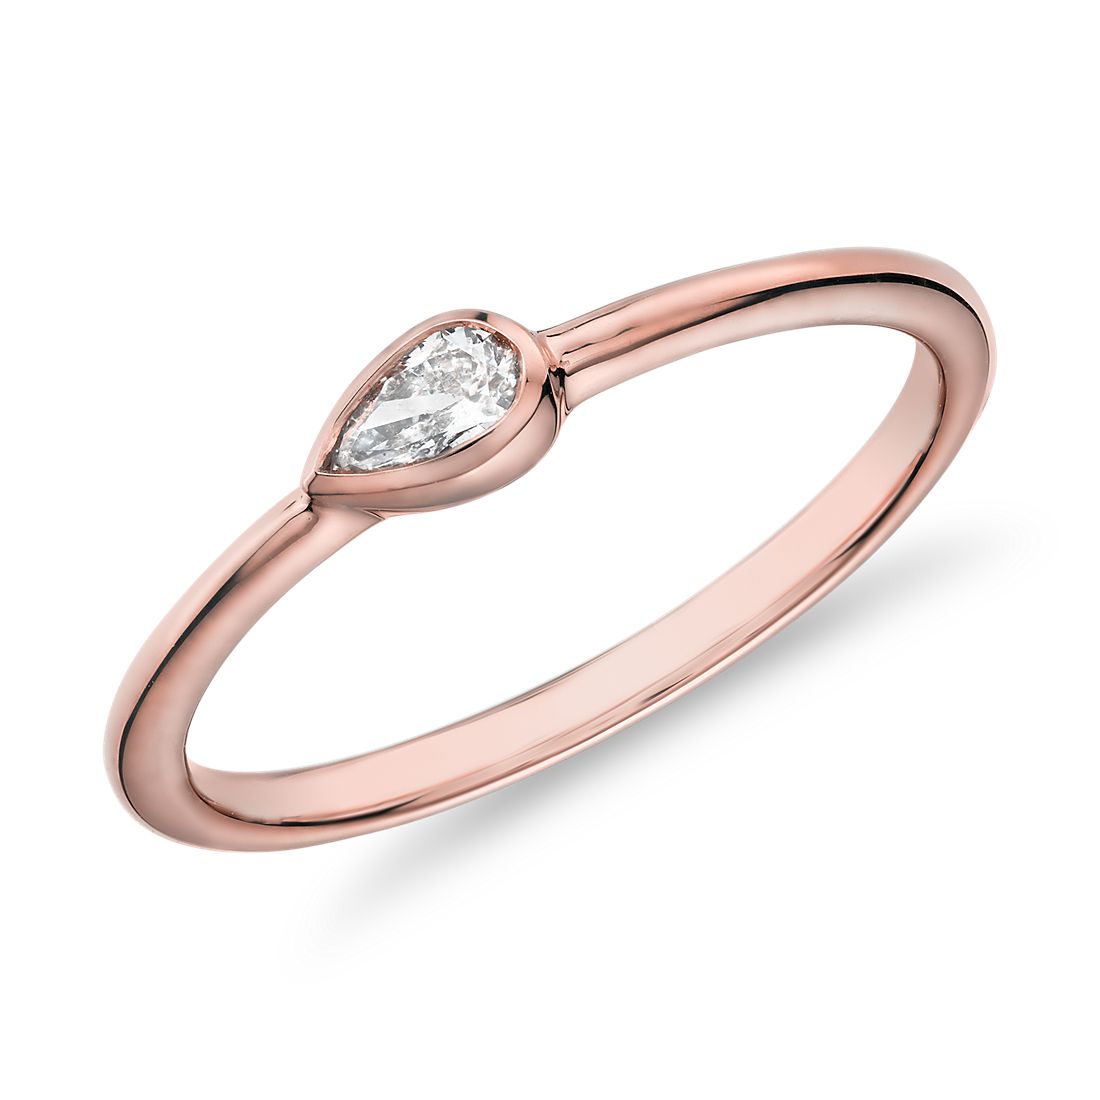 Red gem Rose gold woman ring,Dainty Ring,Cute Ring Thin Ring,Trendy Ring,Stackable Ring,Rings,Rose Gold Ring,Trendy Ring,Cute Ring